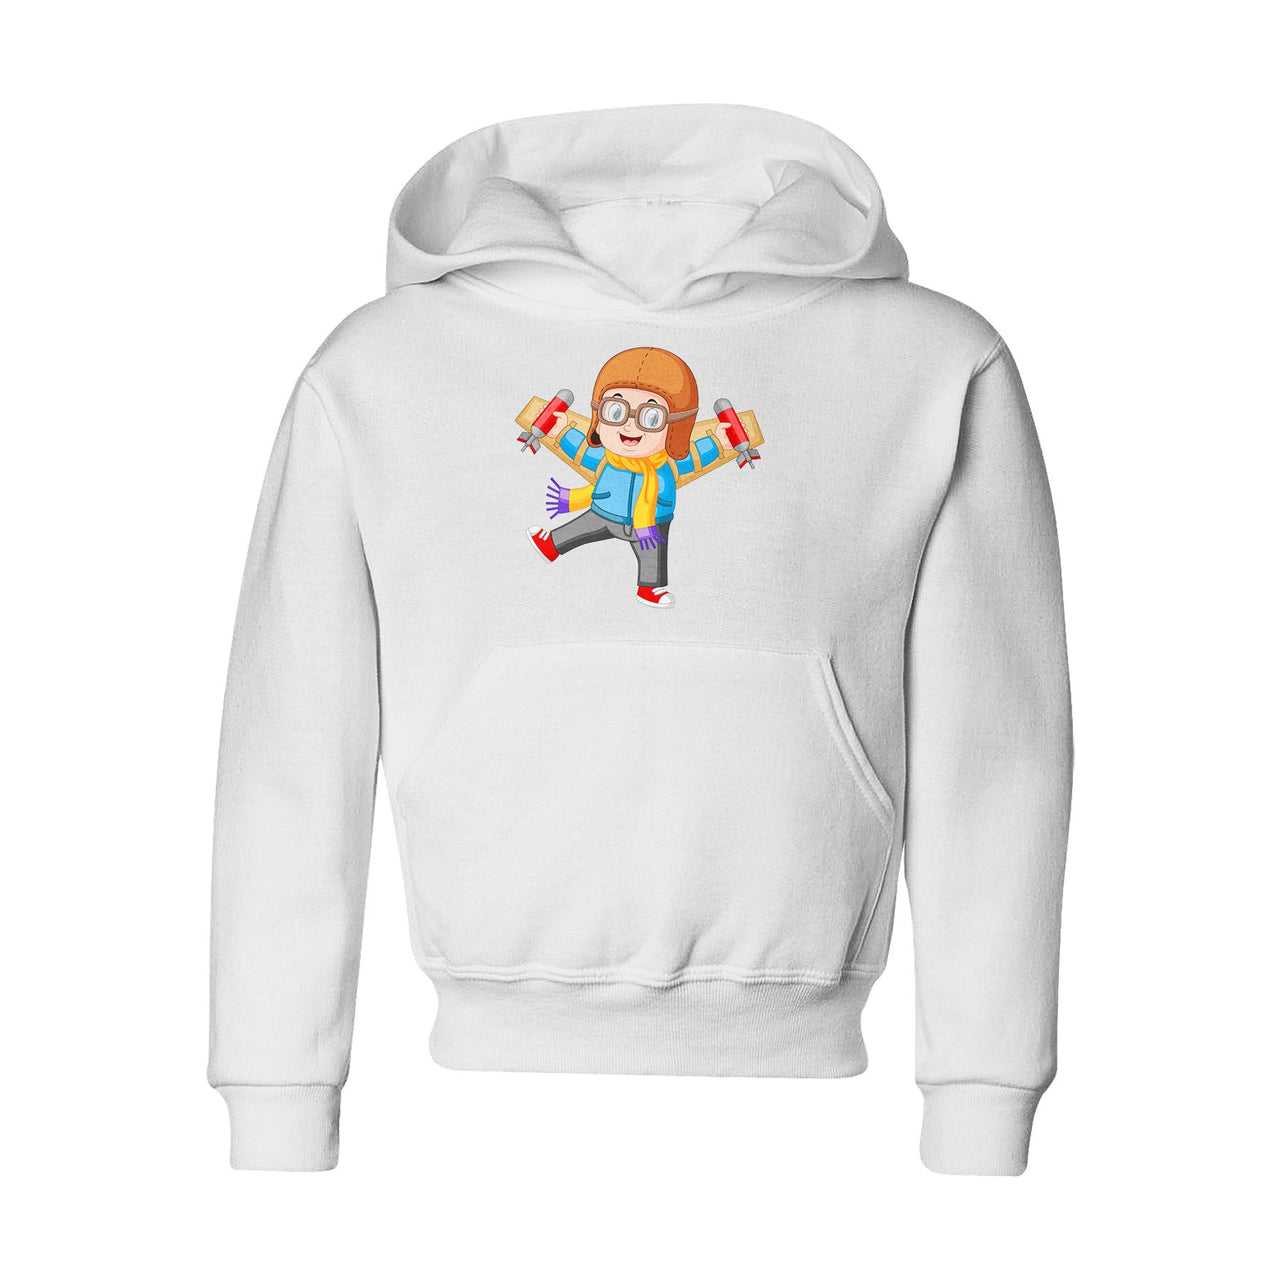 Cute Little Boy Pilot Costume Playing With Wings Designed "CHILDREN" Hoodies